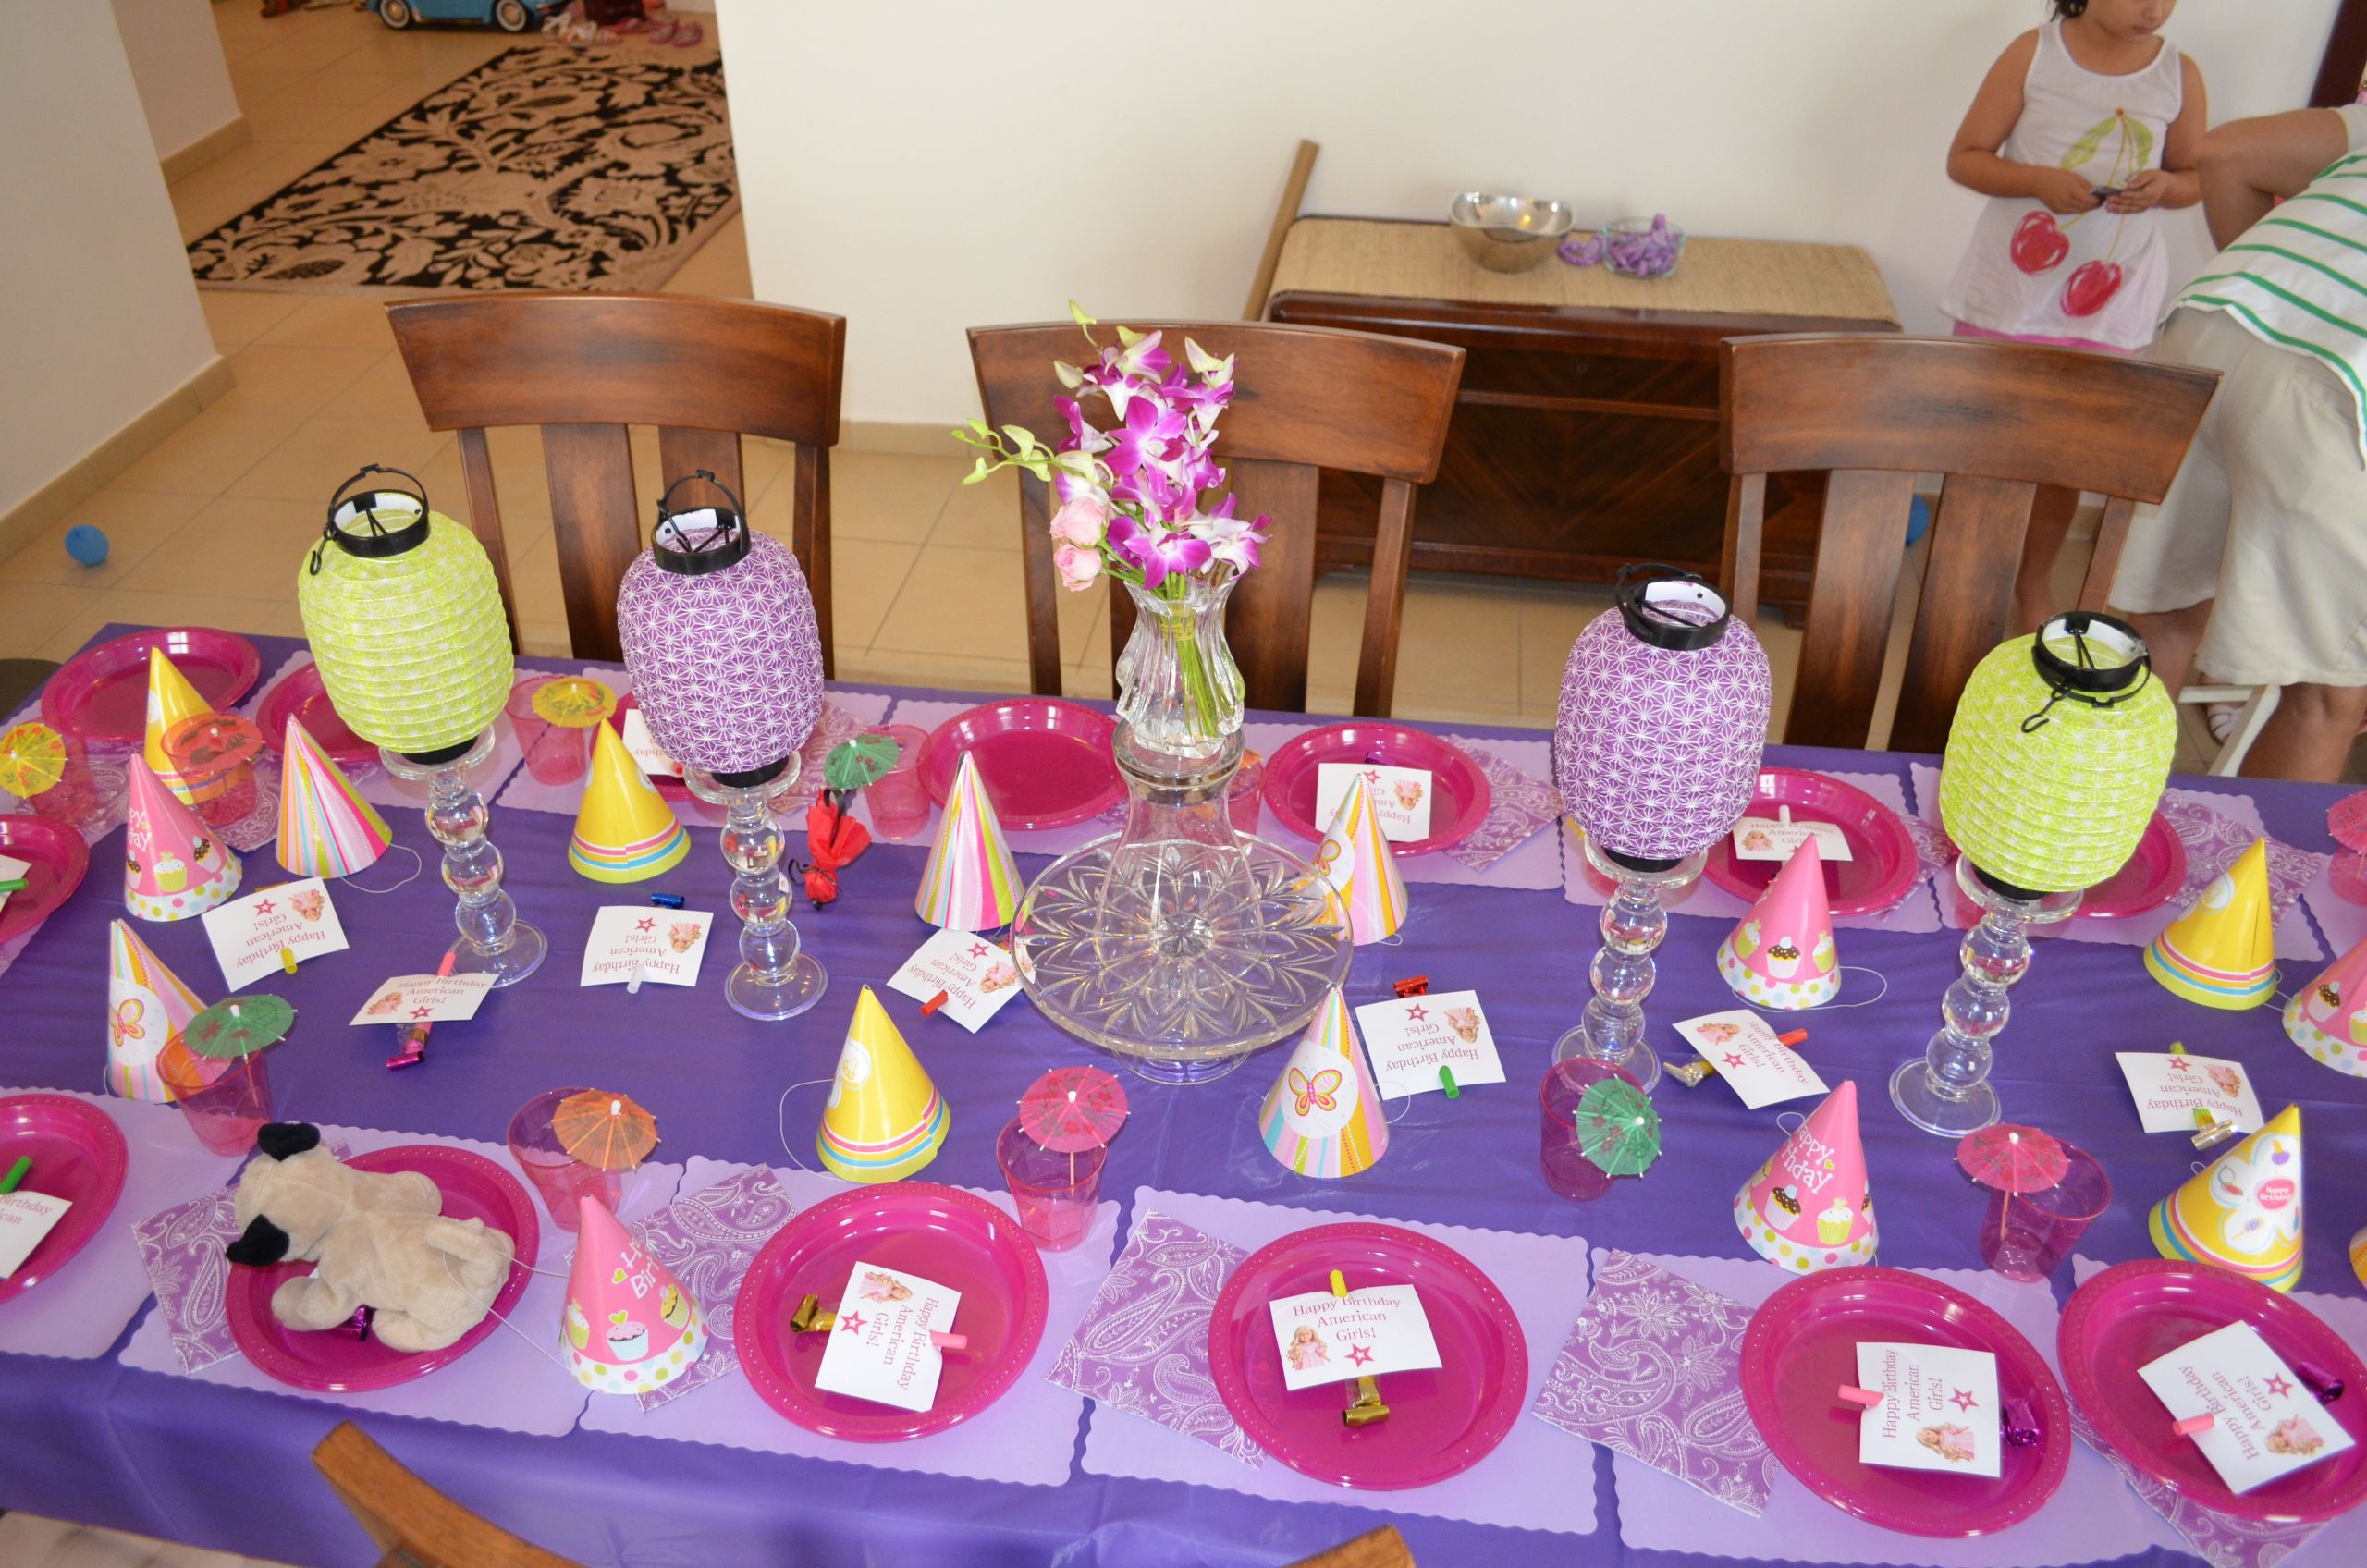 The Best 7 Year Old Birthday Party – Home, Family, Style and Art Ideas